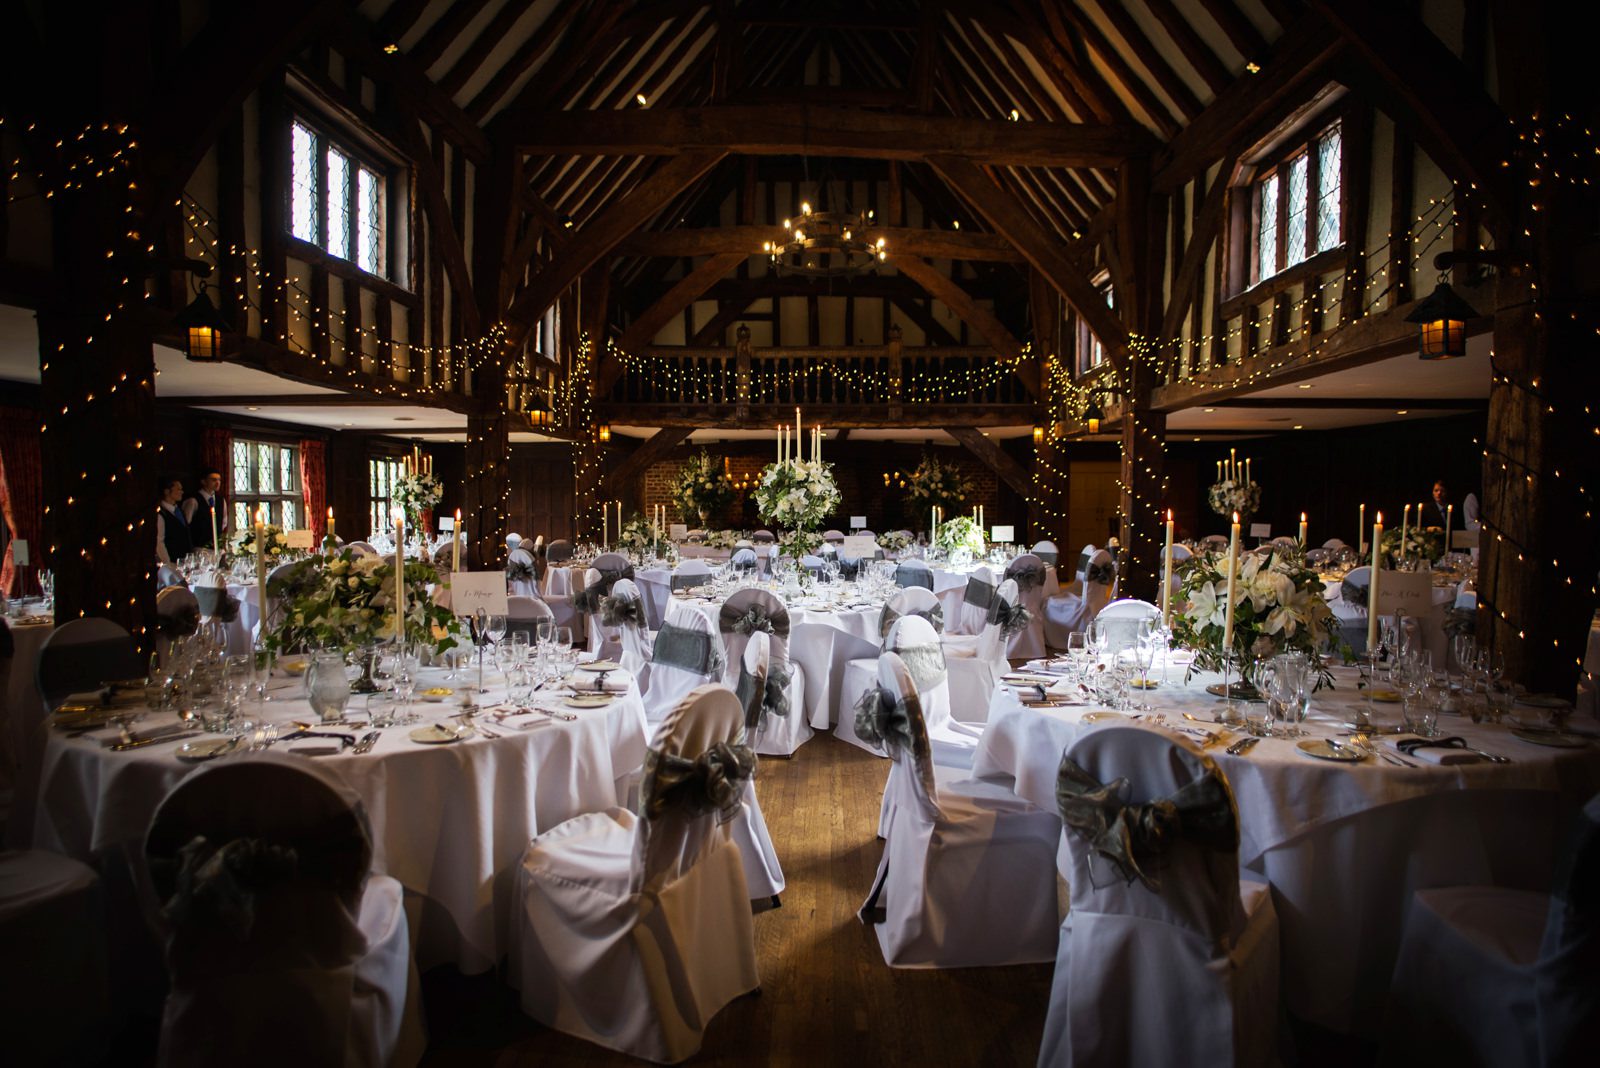 The Tithe Barn at Great Fosters in Surrey - Juliet Mckee Photography.